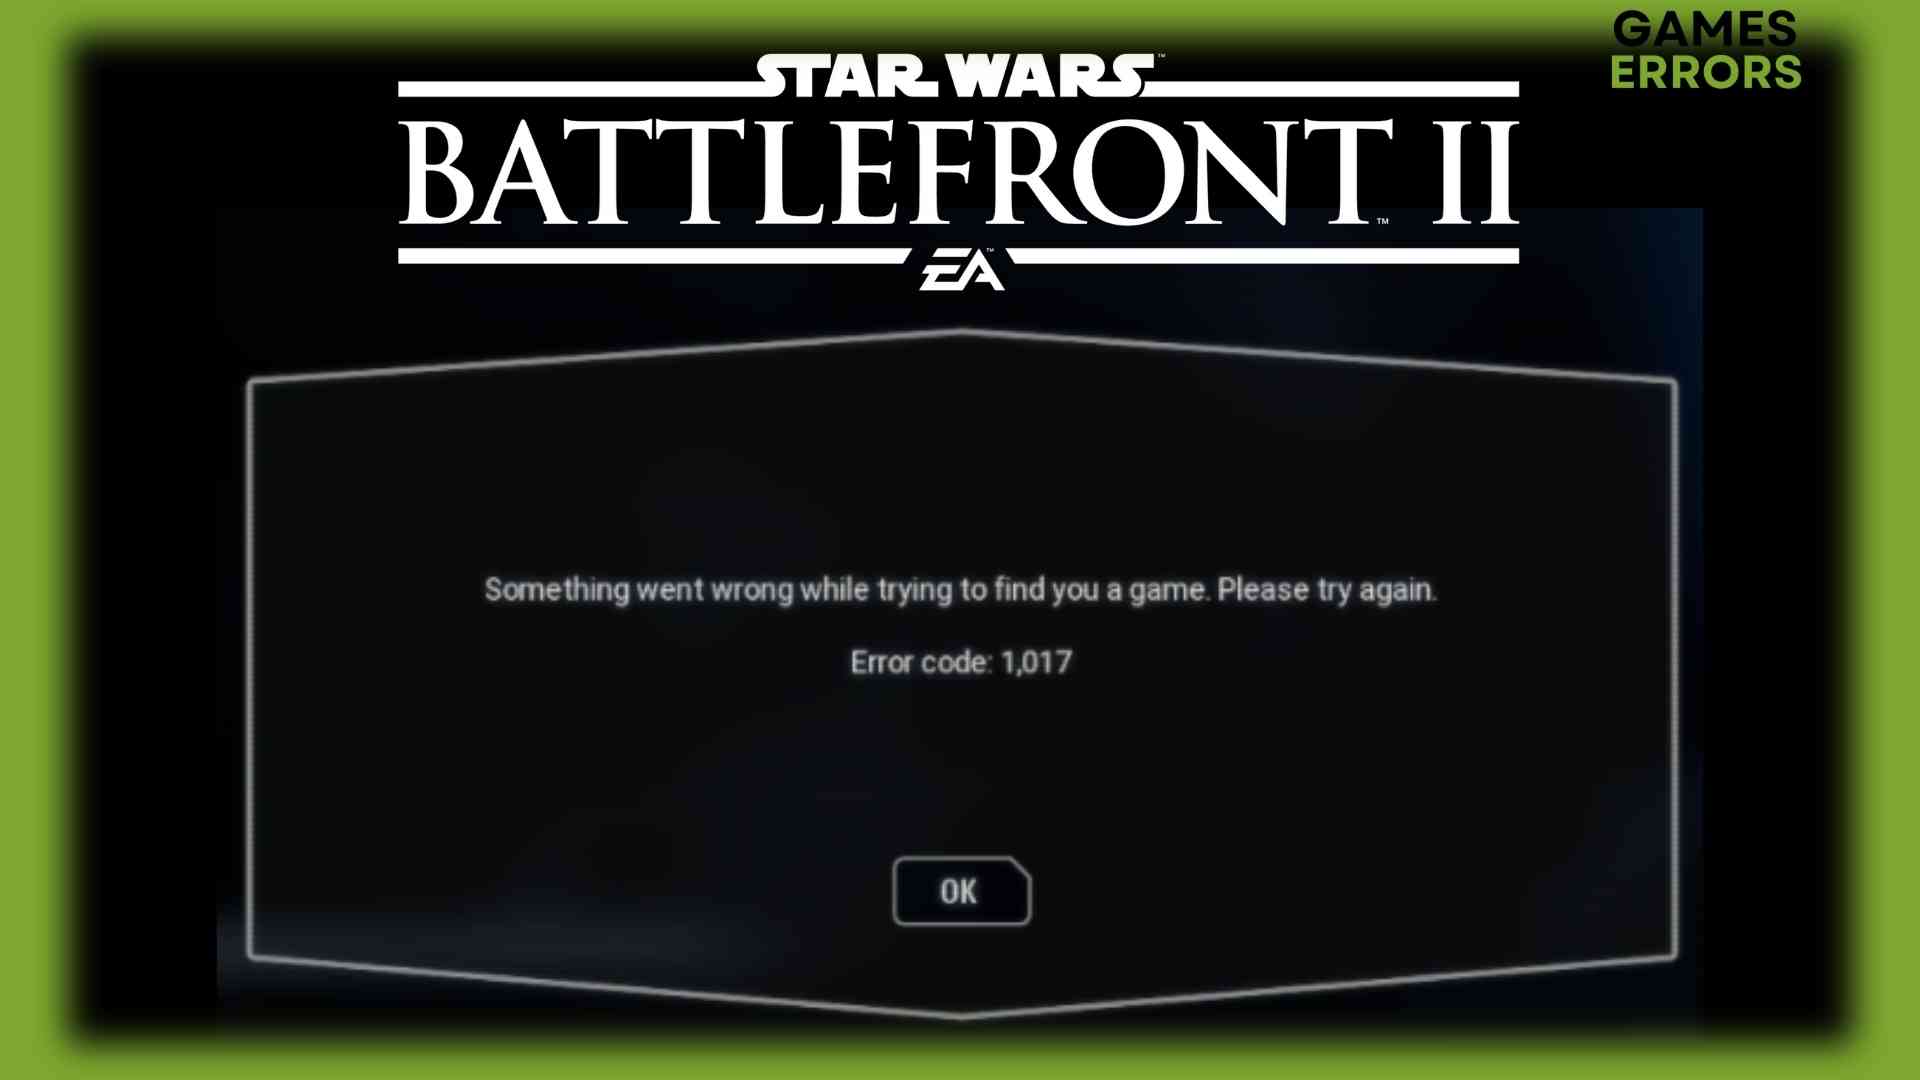 Select this option and wait for the process to complete.
Restart the game and check if the bf2 2.exe errors persist.